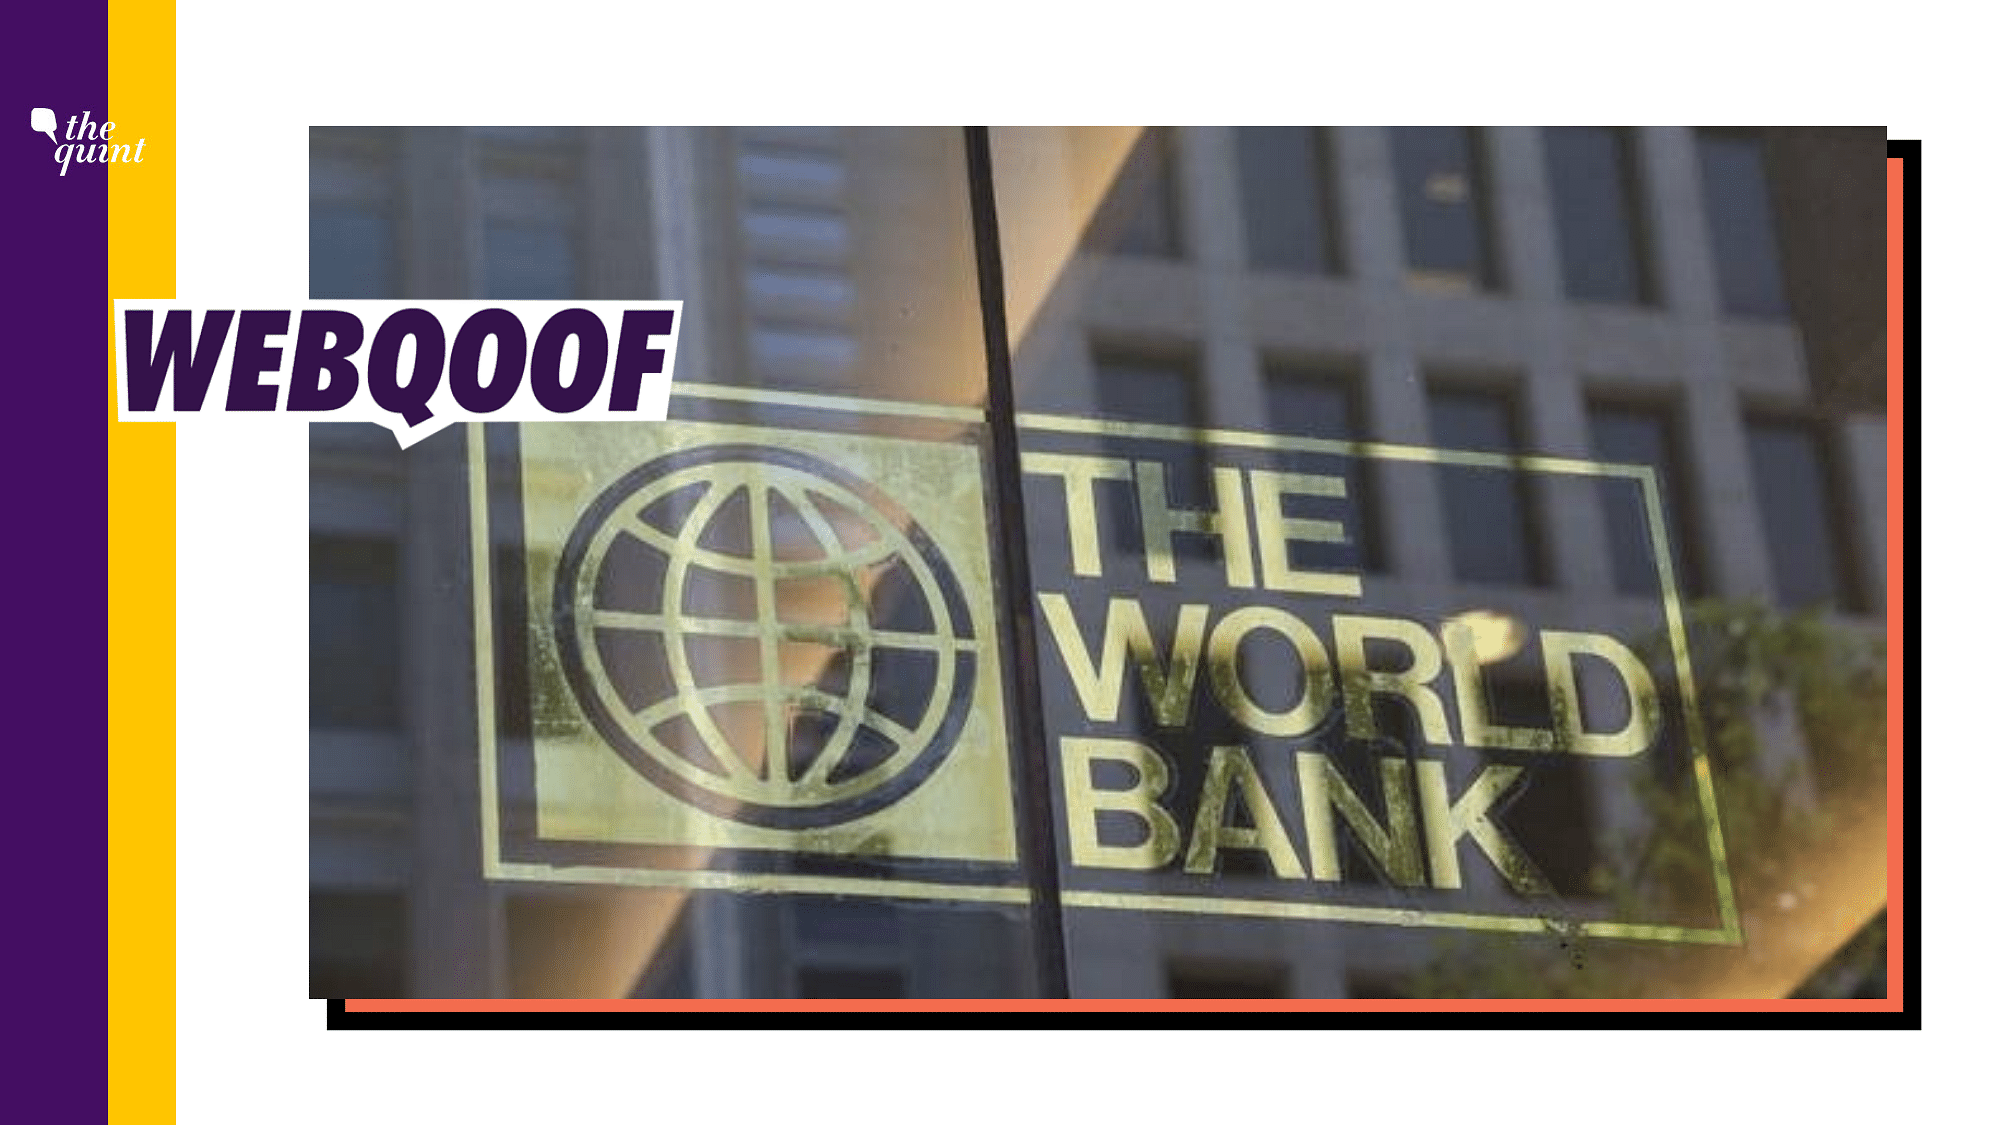 A viral post on Facebook falsely claimed that India owes an amount of over $1 lakh million to the World Bank.